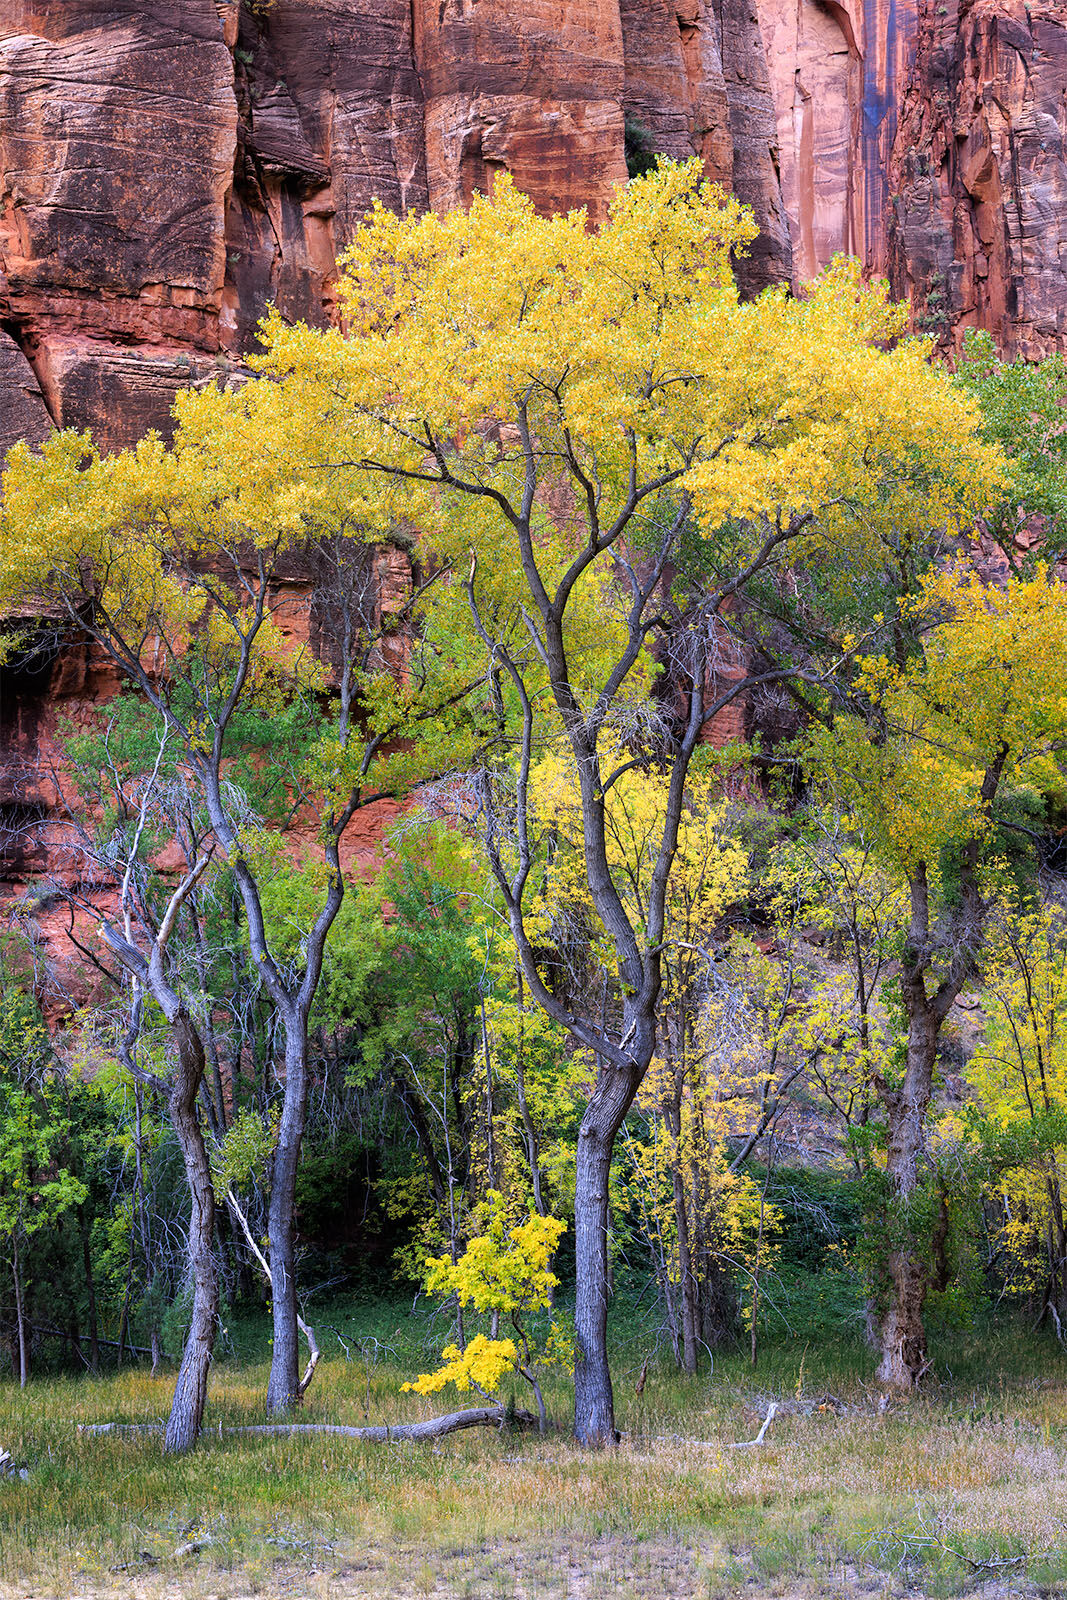 Spinkly cottonwood trees that rise up off the canyon floor and have a crown of golden leaves.